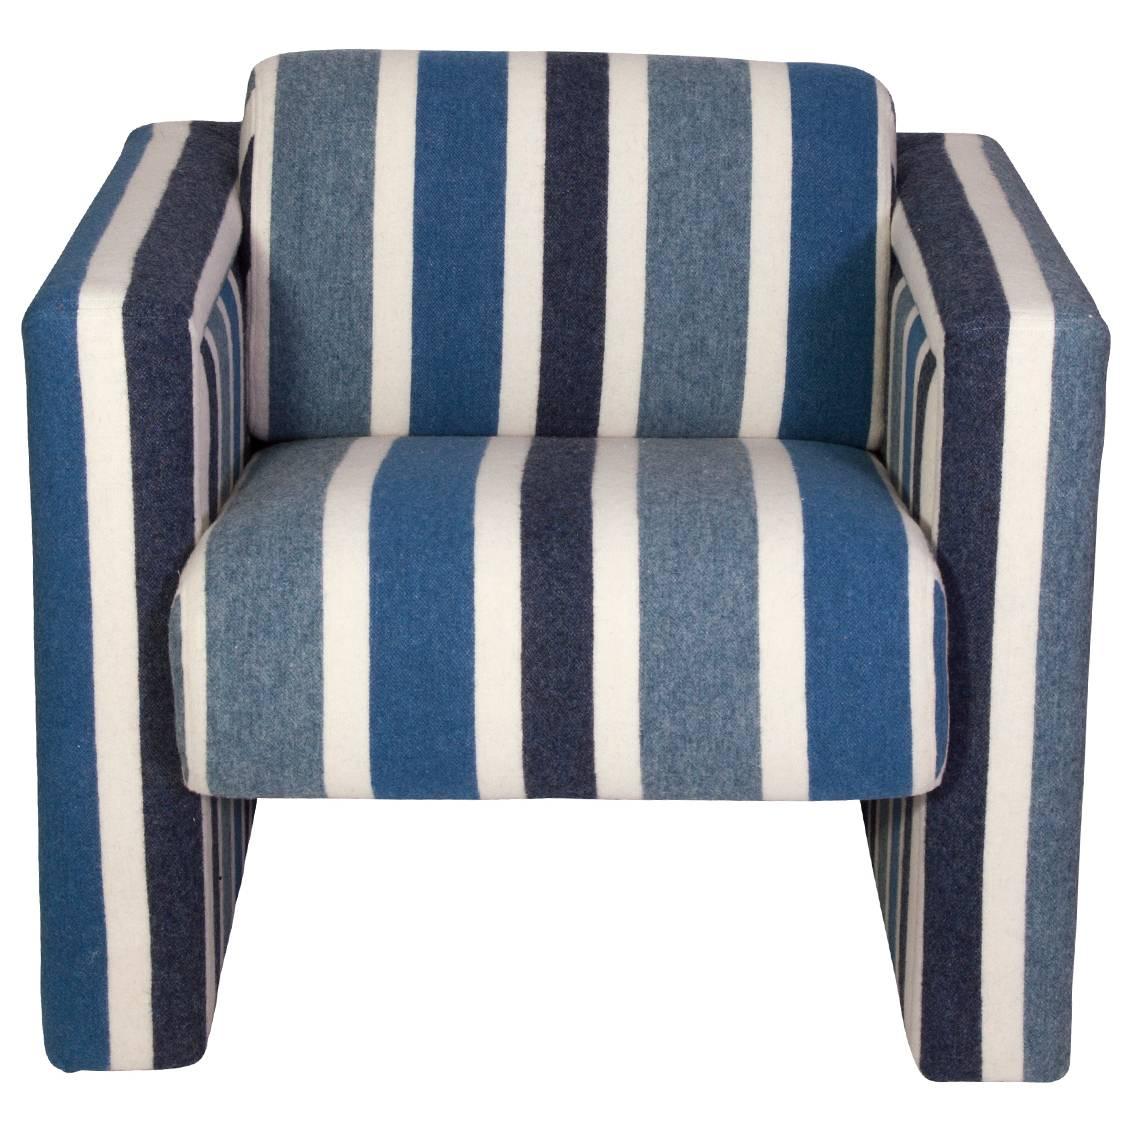 Nautical club chairs in blue and white wool, pair.